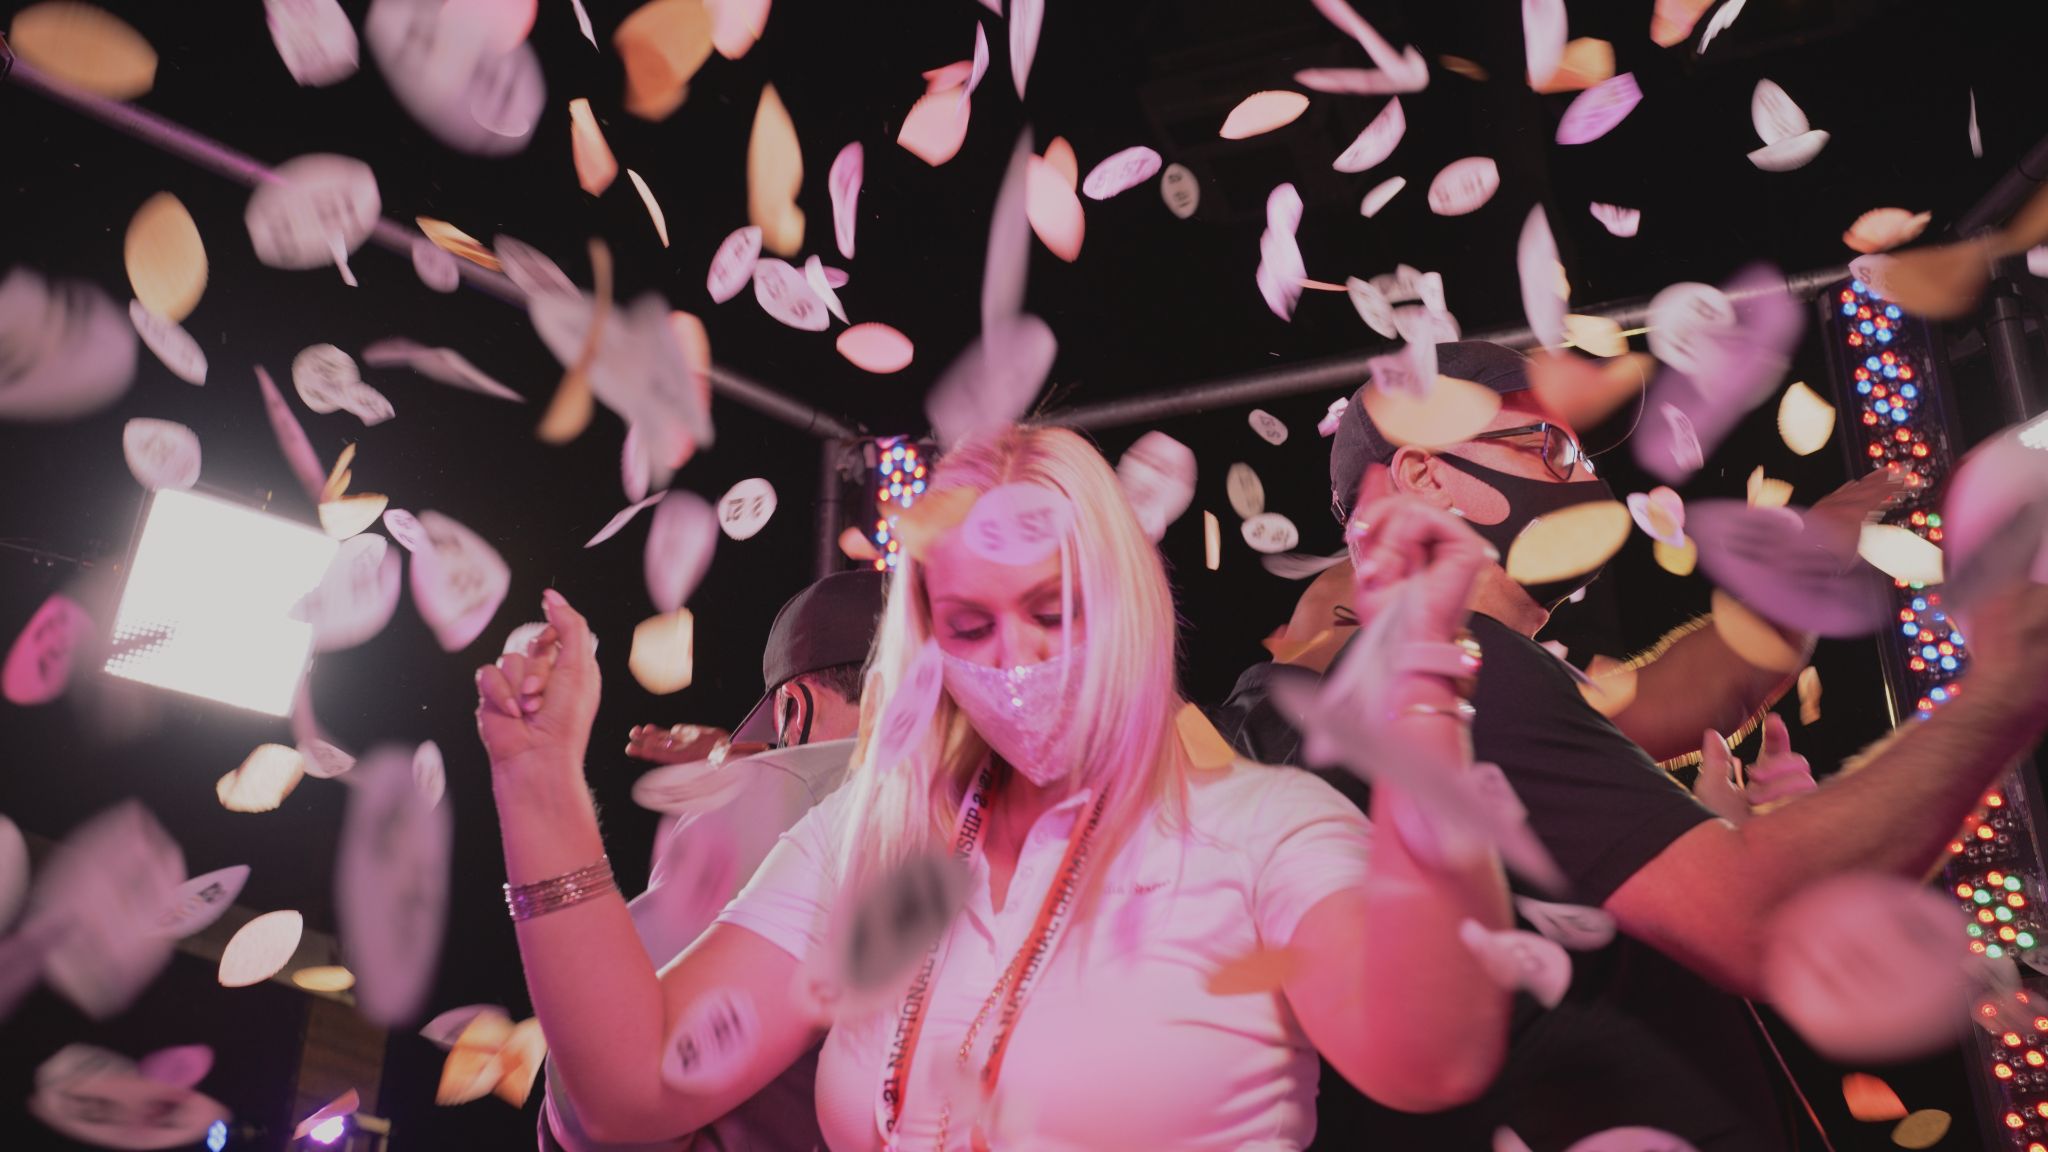 Where to Use a Brand Sizzle Woman with long blond hair wearing mask dancing among confetti with two male crew members behind her